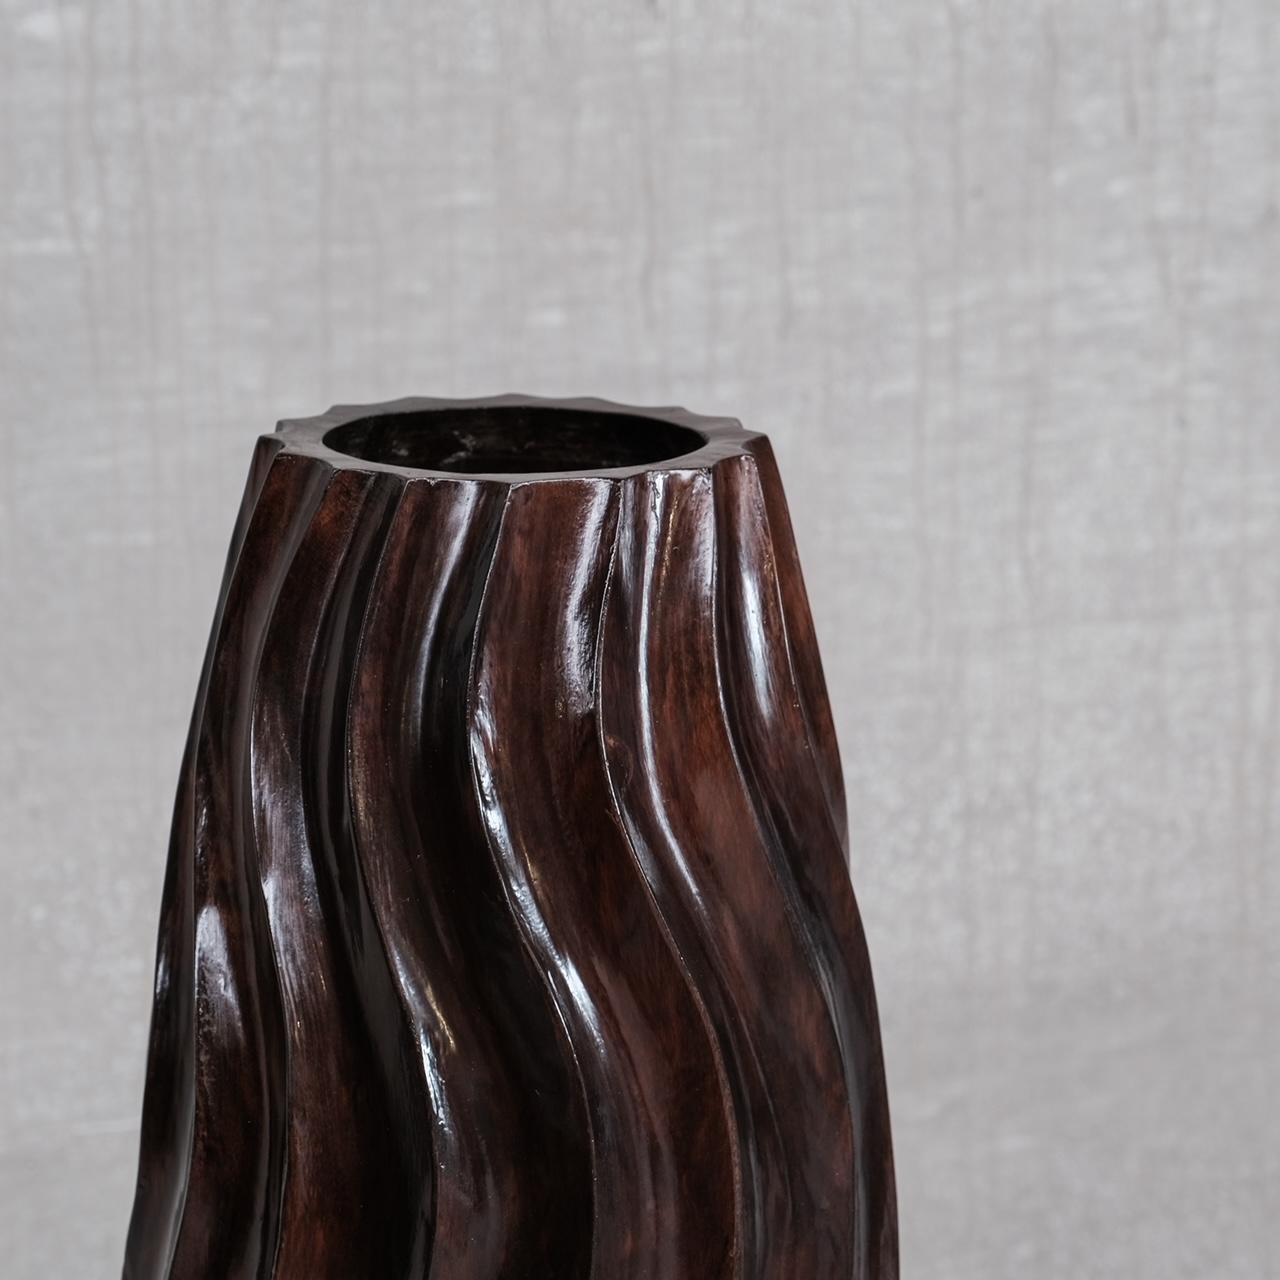 Wooden Tall French Mid-Century Decorative Vase In Good Condition For Sale In London, GB